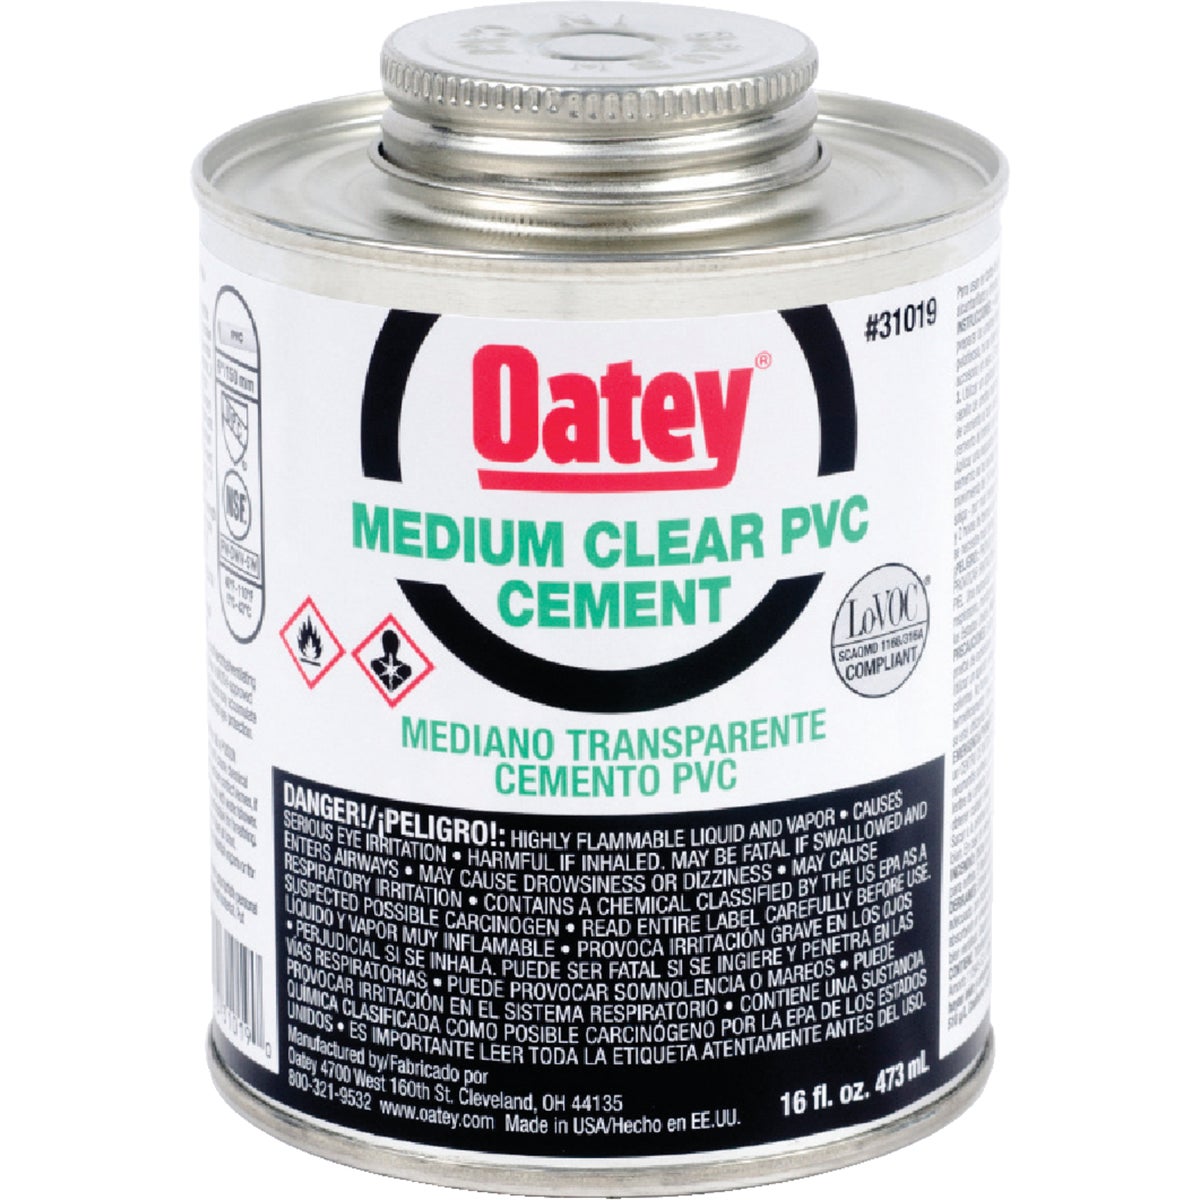 Oatey 1 Pt. Medium Bodied Clear PVC Cement